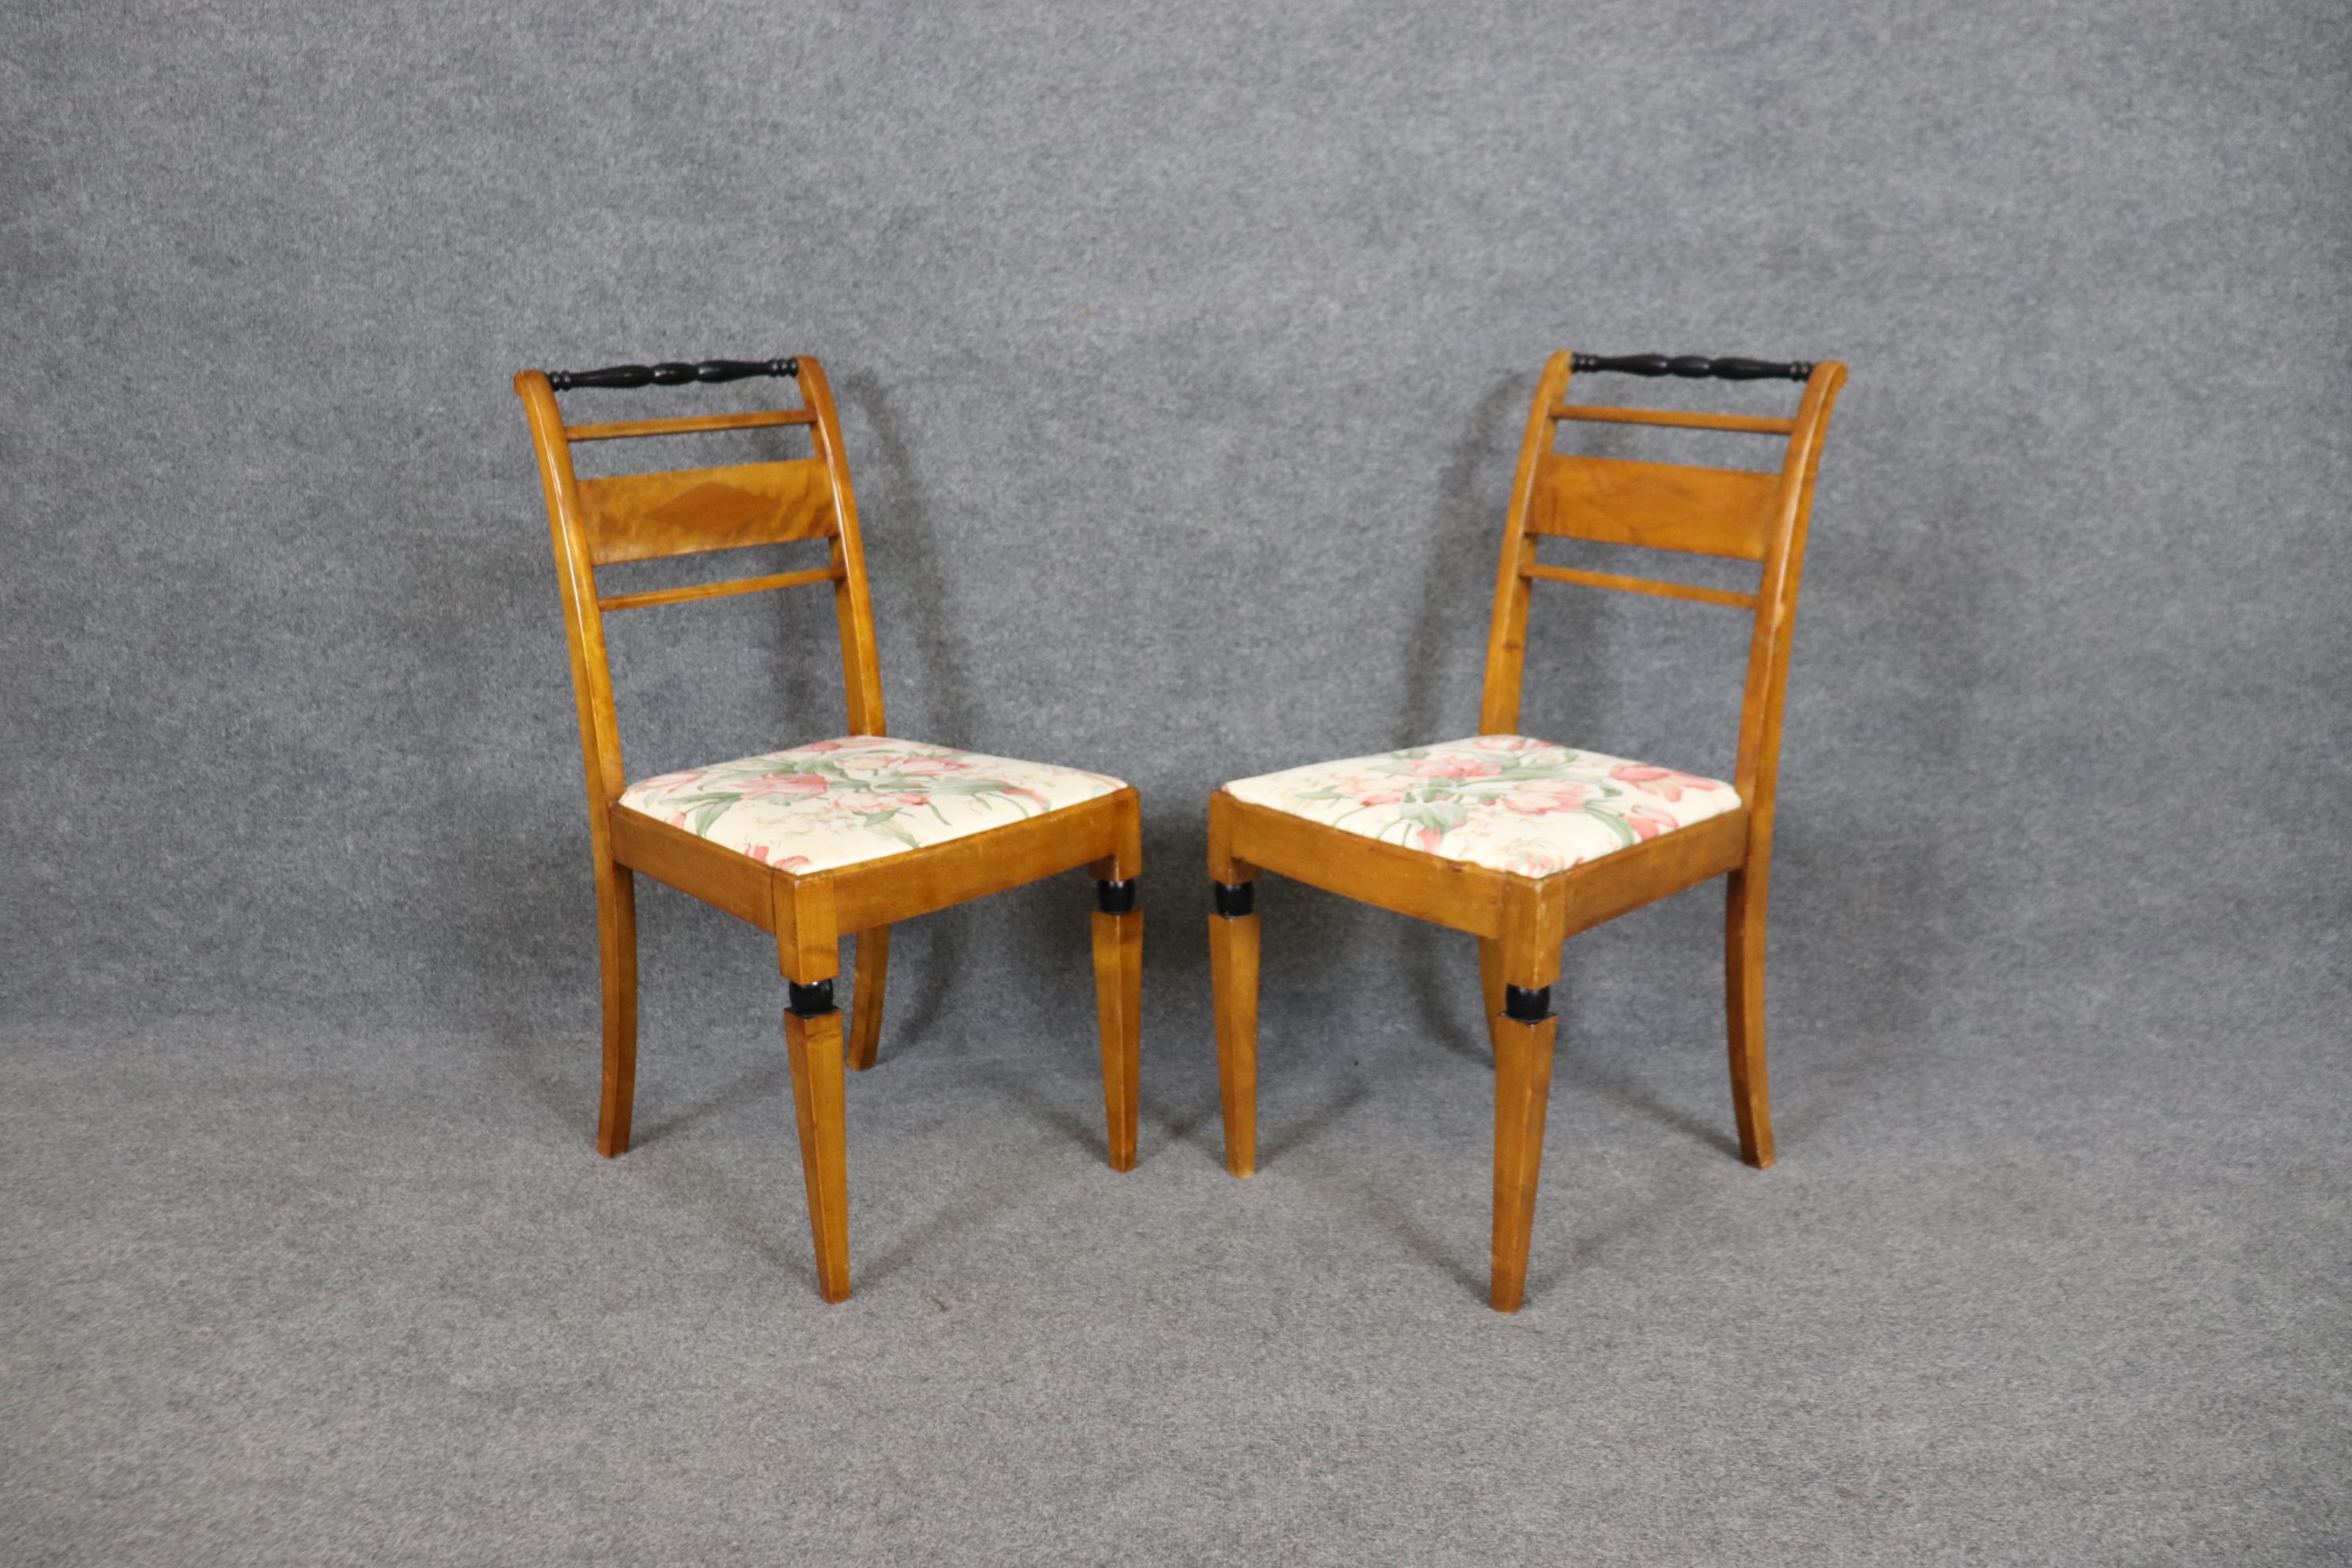 This is a fine pair of Biedermeier style chairs made during the 1900-1920s era in most likely Germany. The chairs are in good condition and will show losses and signs of age and use that are indicative of age. Measures 35.5 tall x 18 wide x 21 deep